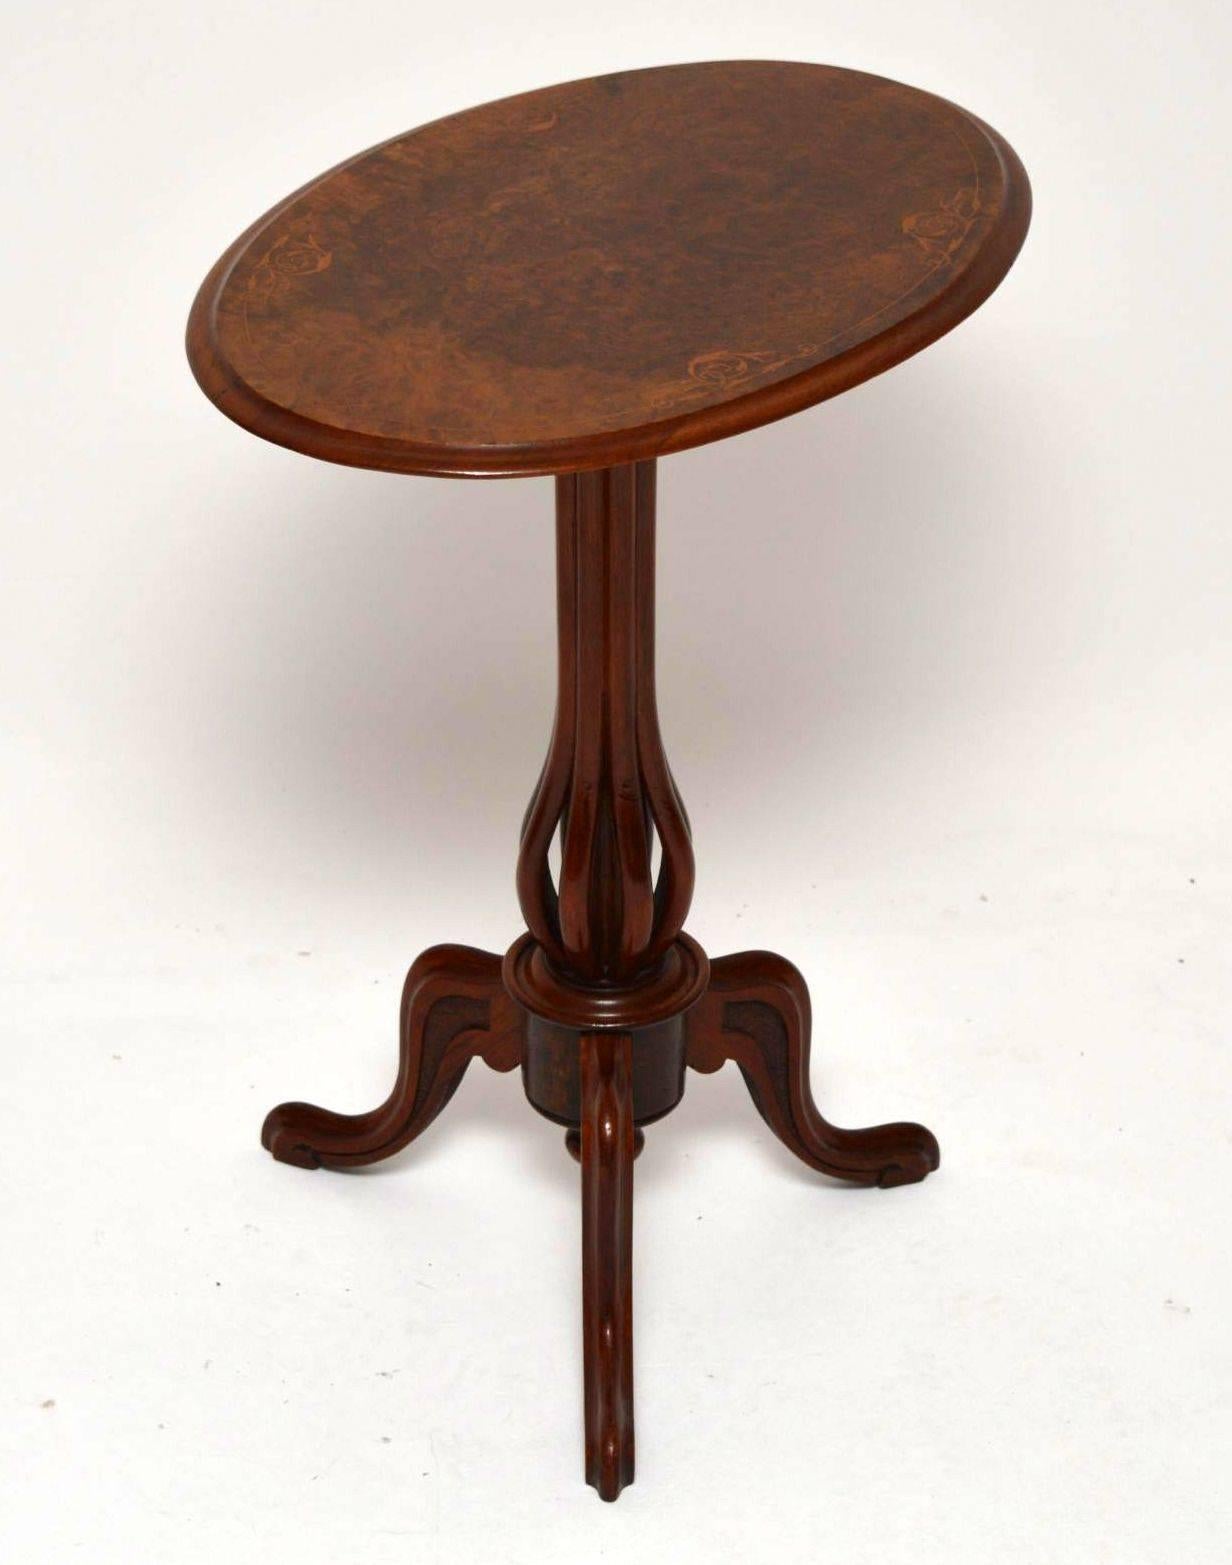 Small antique Victorian oval tilt-top table with a finely inlaid burr walnut top which can be flipped up. This sits on a very unusual column made up of eight walnut sections, that in turn sit on a tripod base. This table is wonderful quality and has